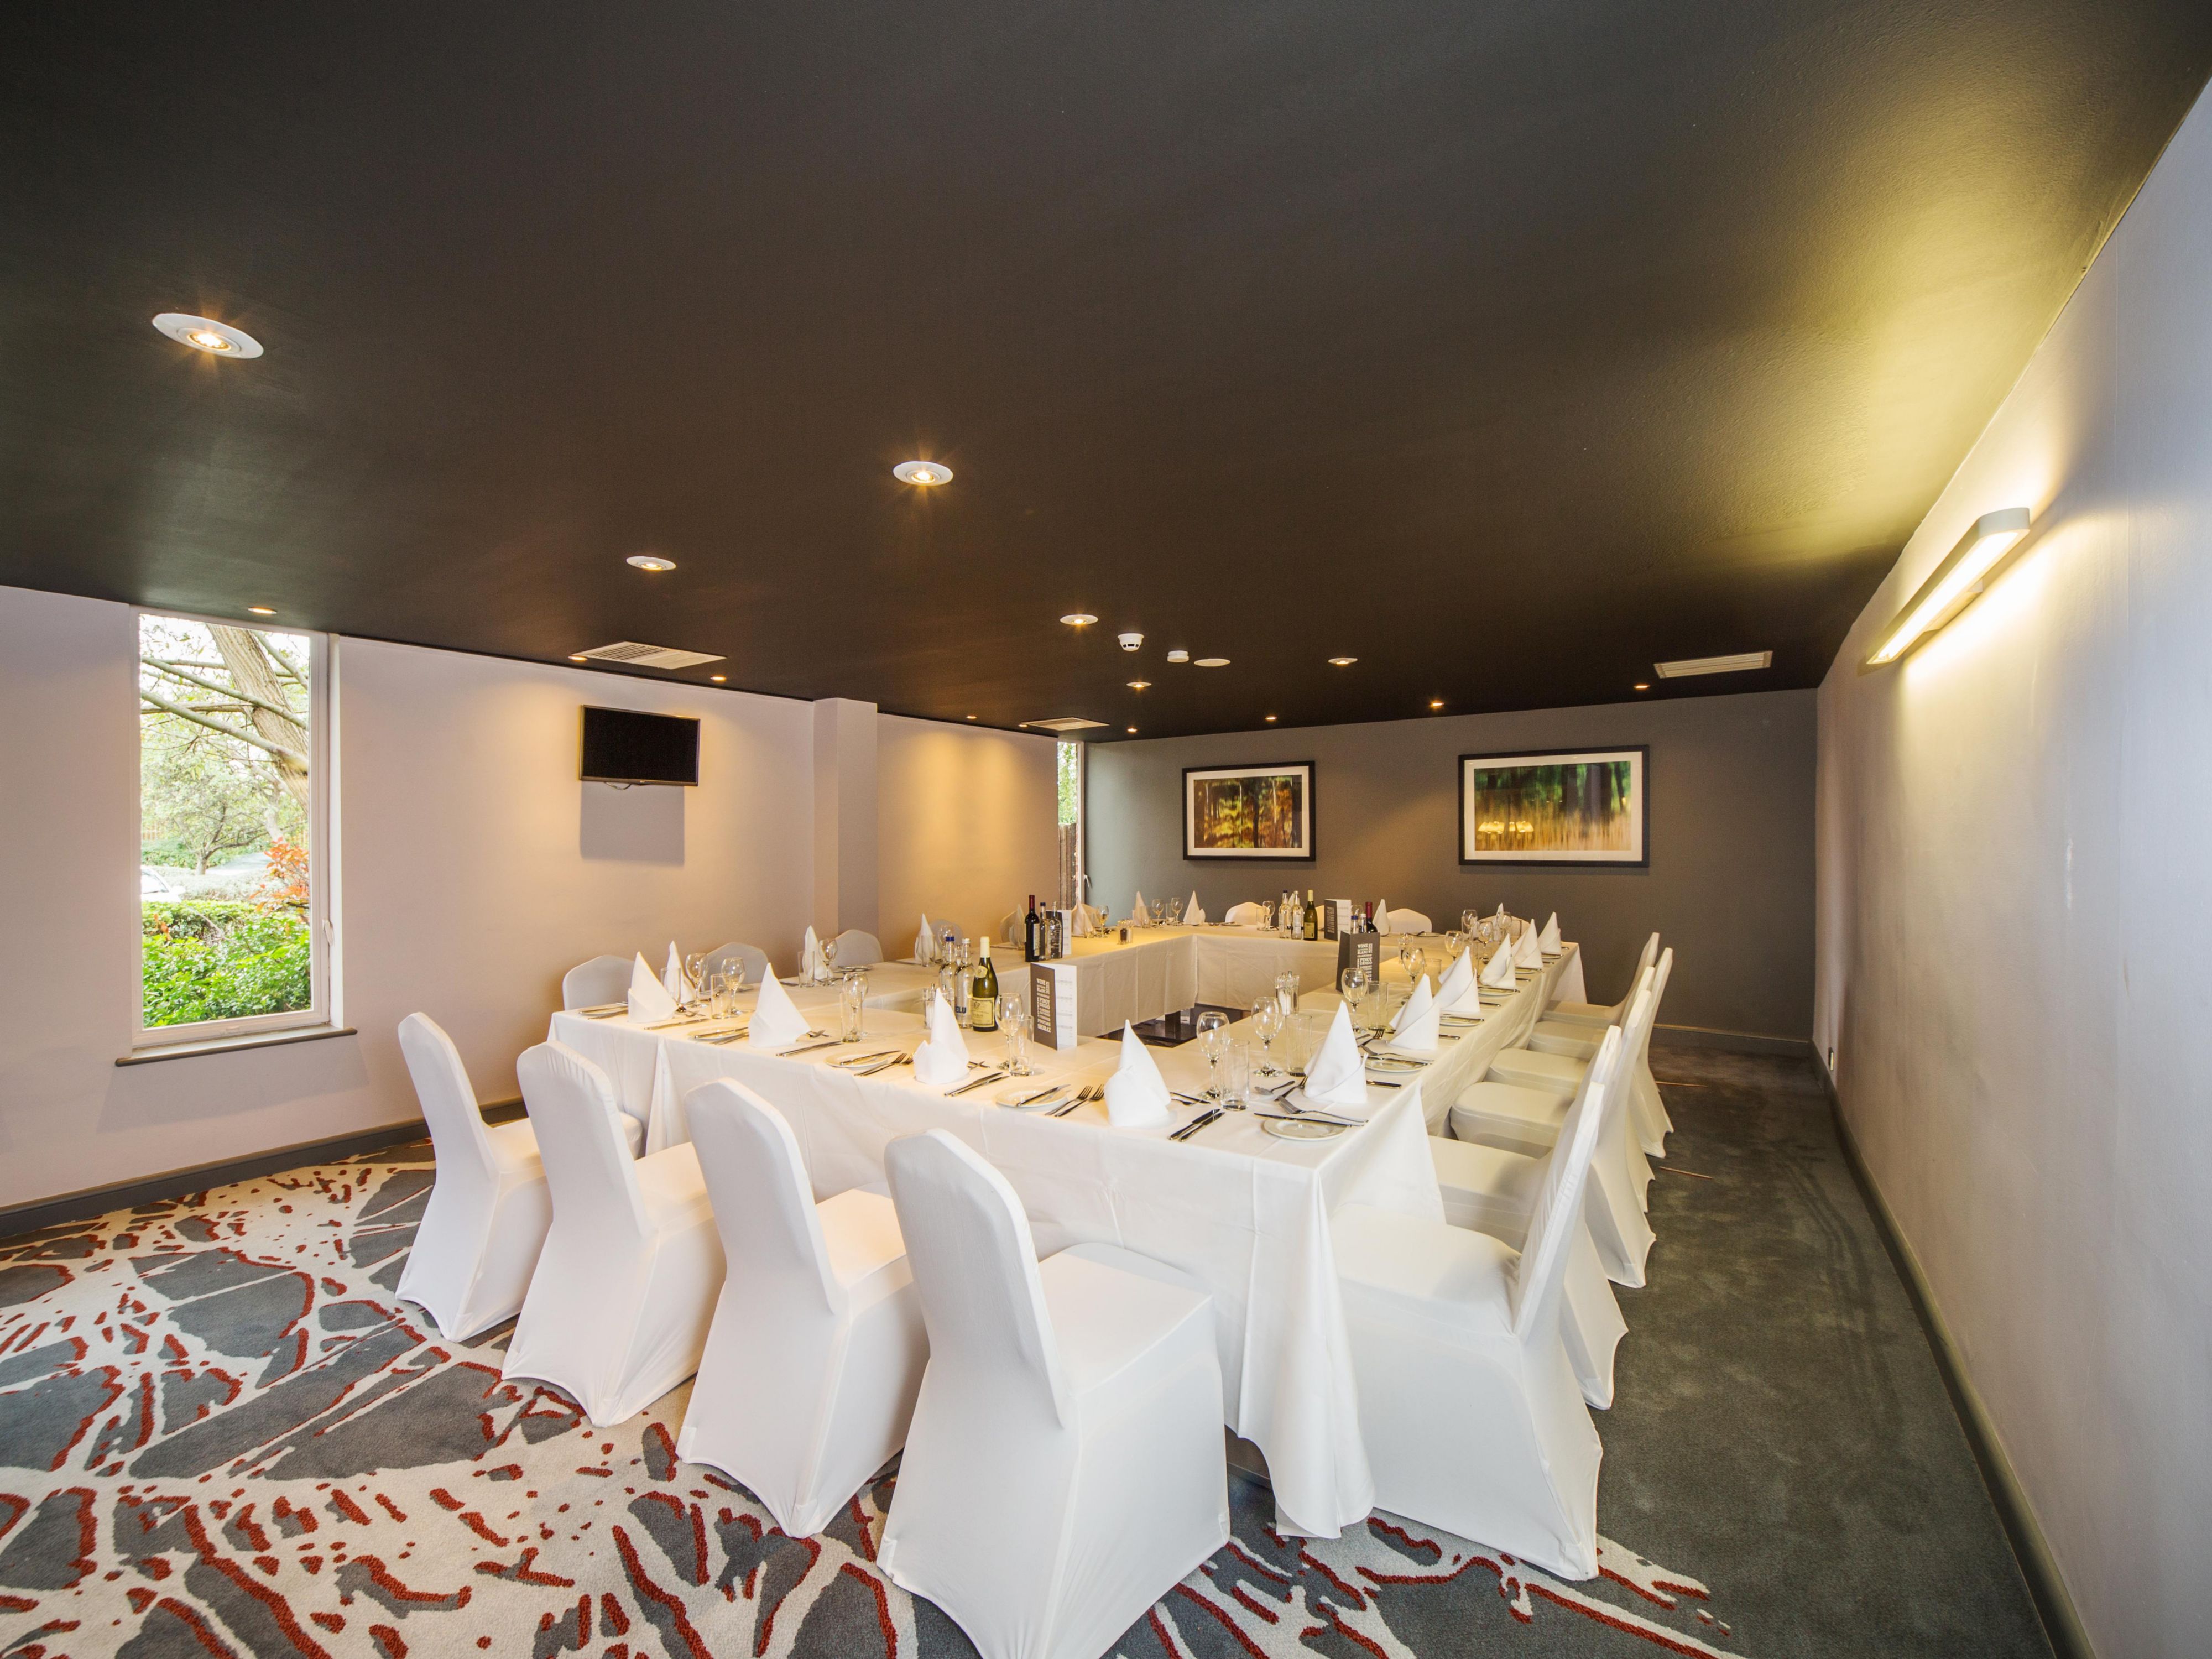 Here at the Holiday Inn Reading South, we offer a number of private dining solutions. Whether you're looking to organize an intimate dinner for a small group, or a large celebratory dinner for up to 180 guests, we have the perfect space for your event.